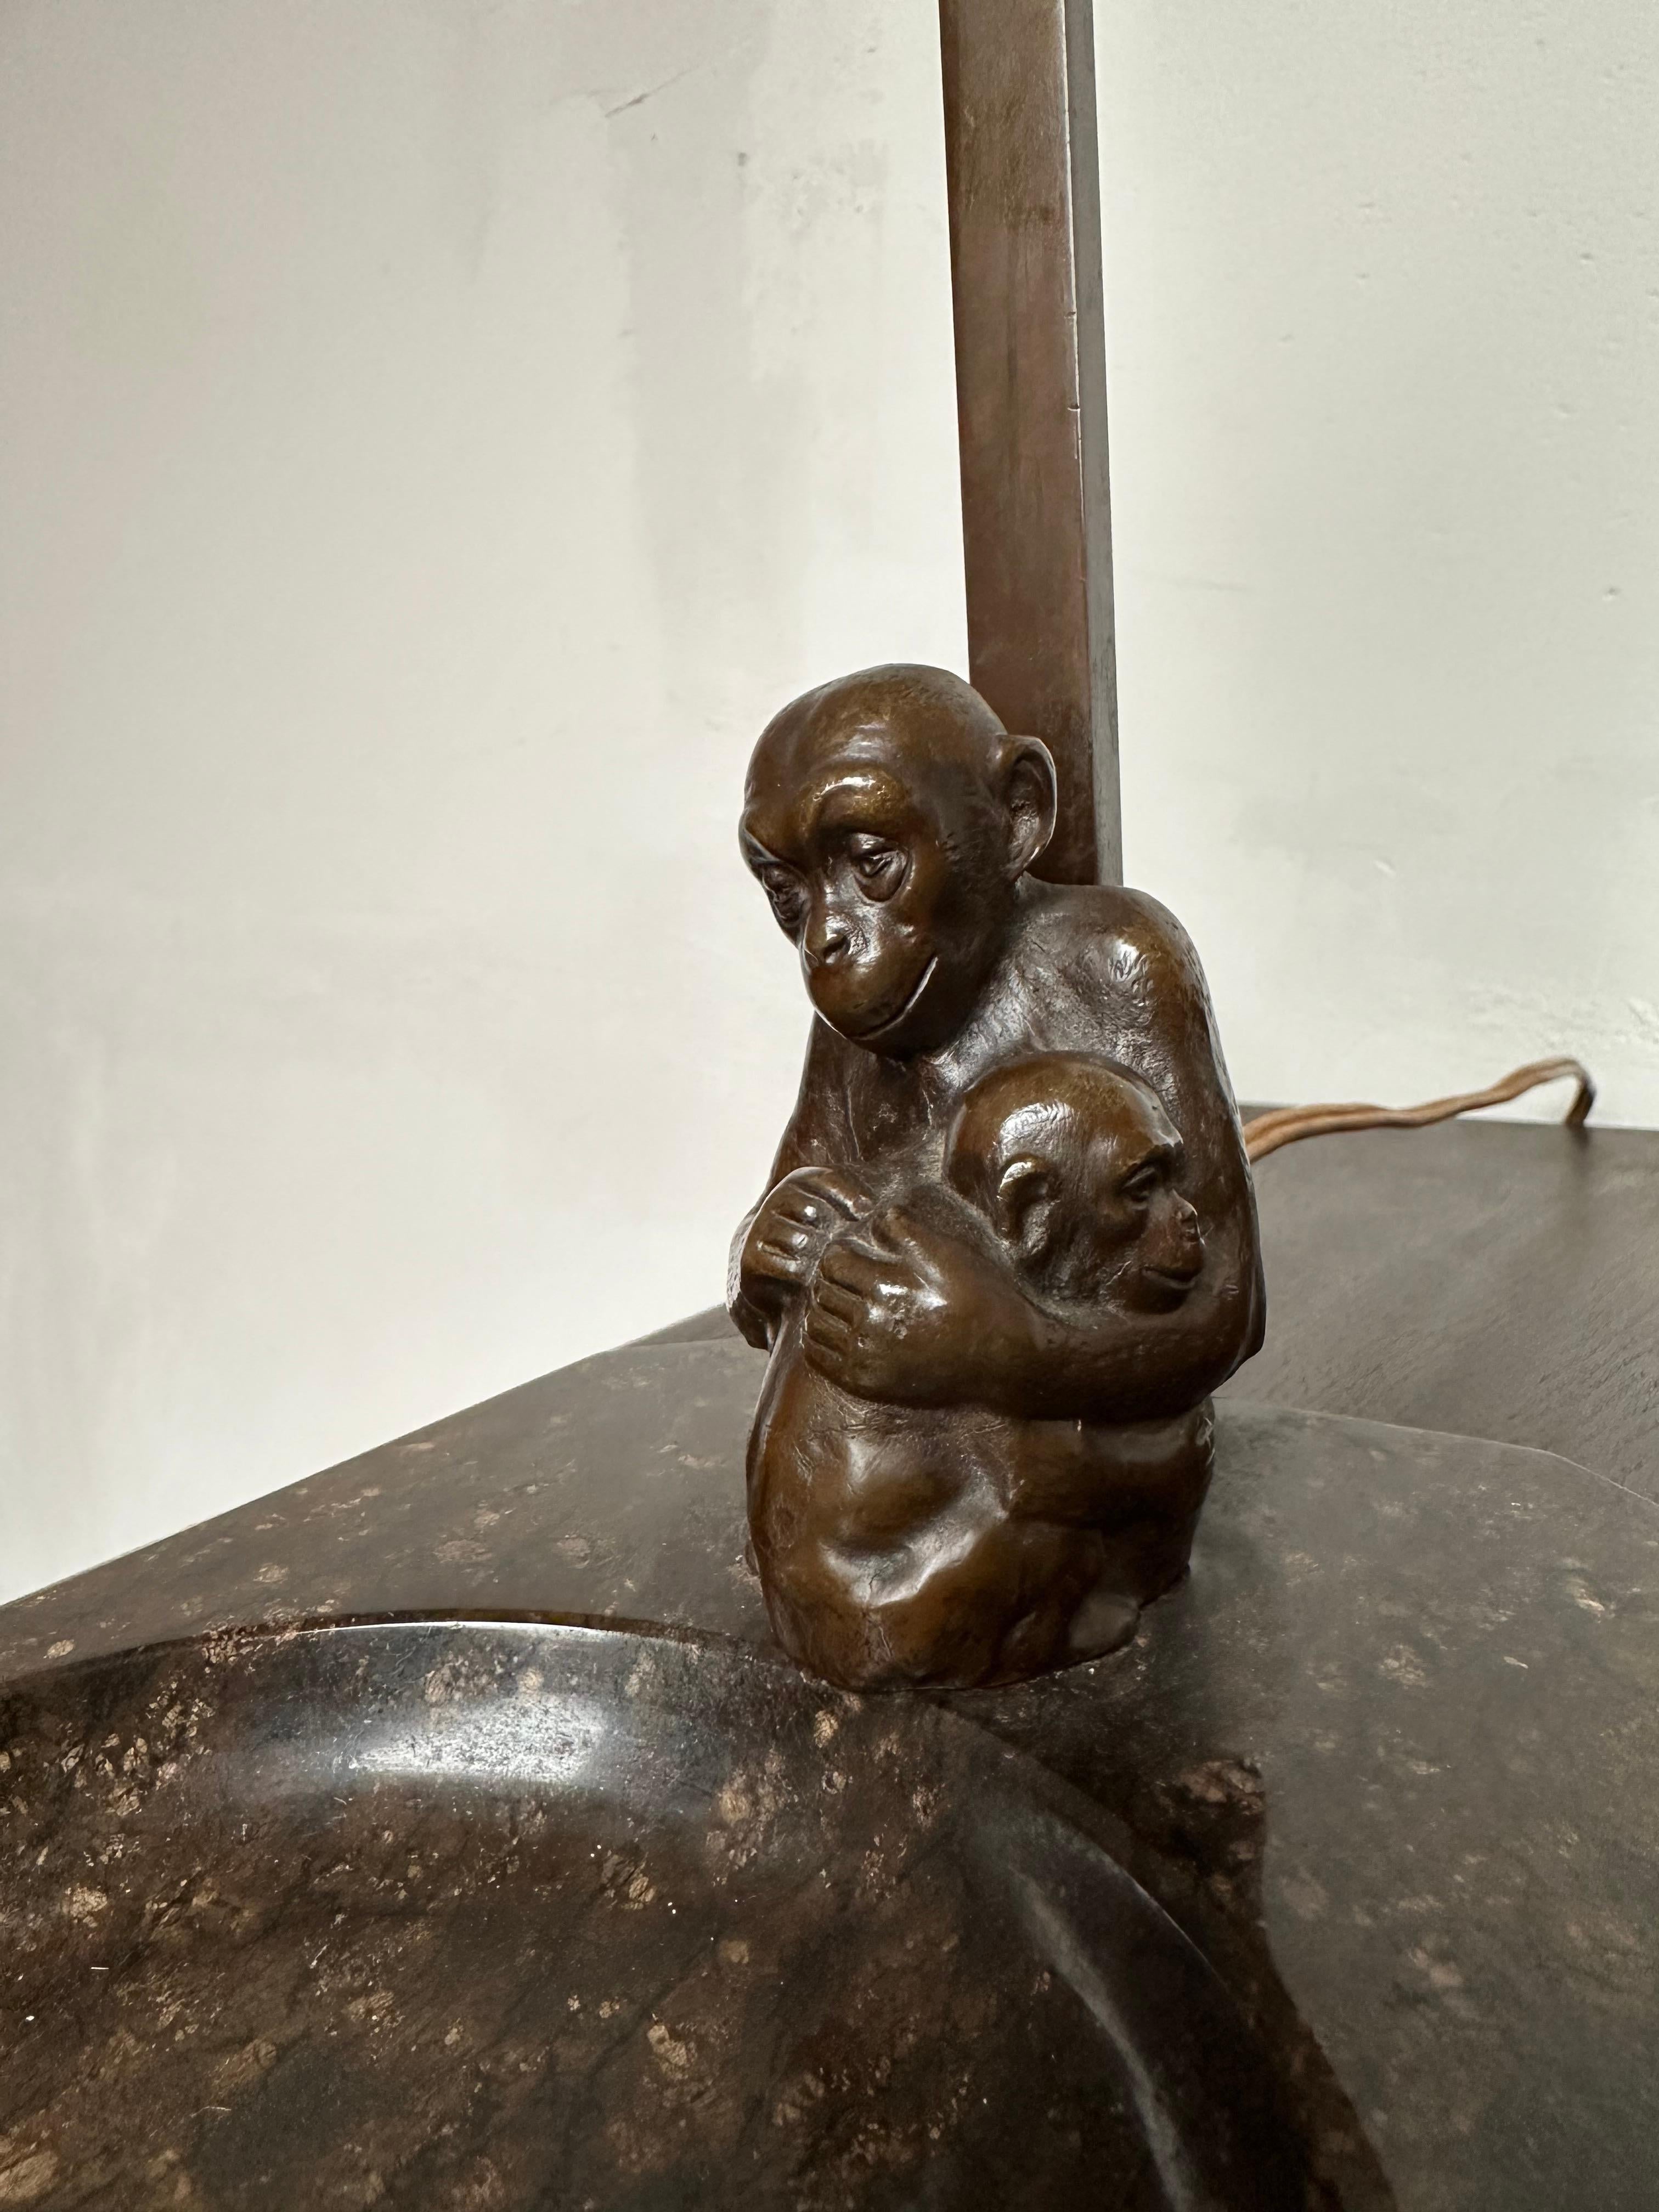 Very Decorative & Artistic Table Desk Lamp with Bronze Grooming Chimps Sculpture For Sale 11